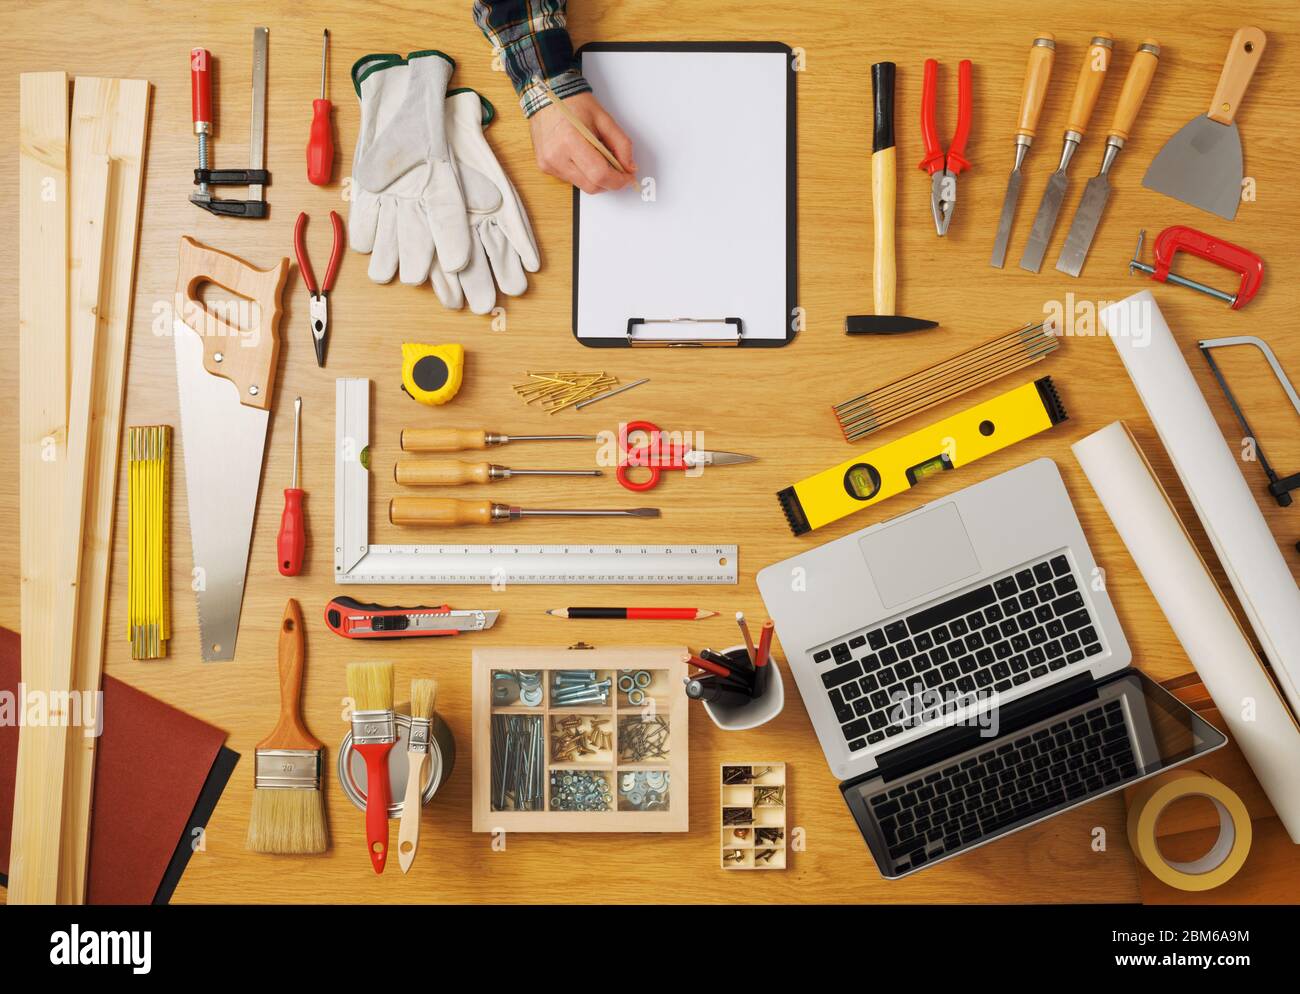 Male hand sketching on a white clipboard top view, DIY work tools all around, carpentry and hobby concept Stock Photo